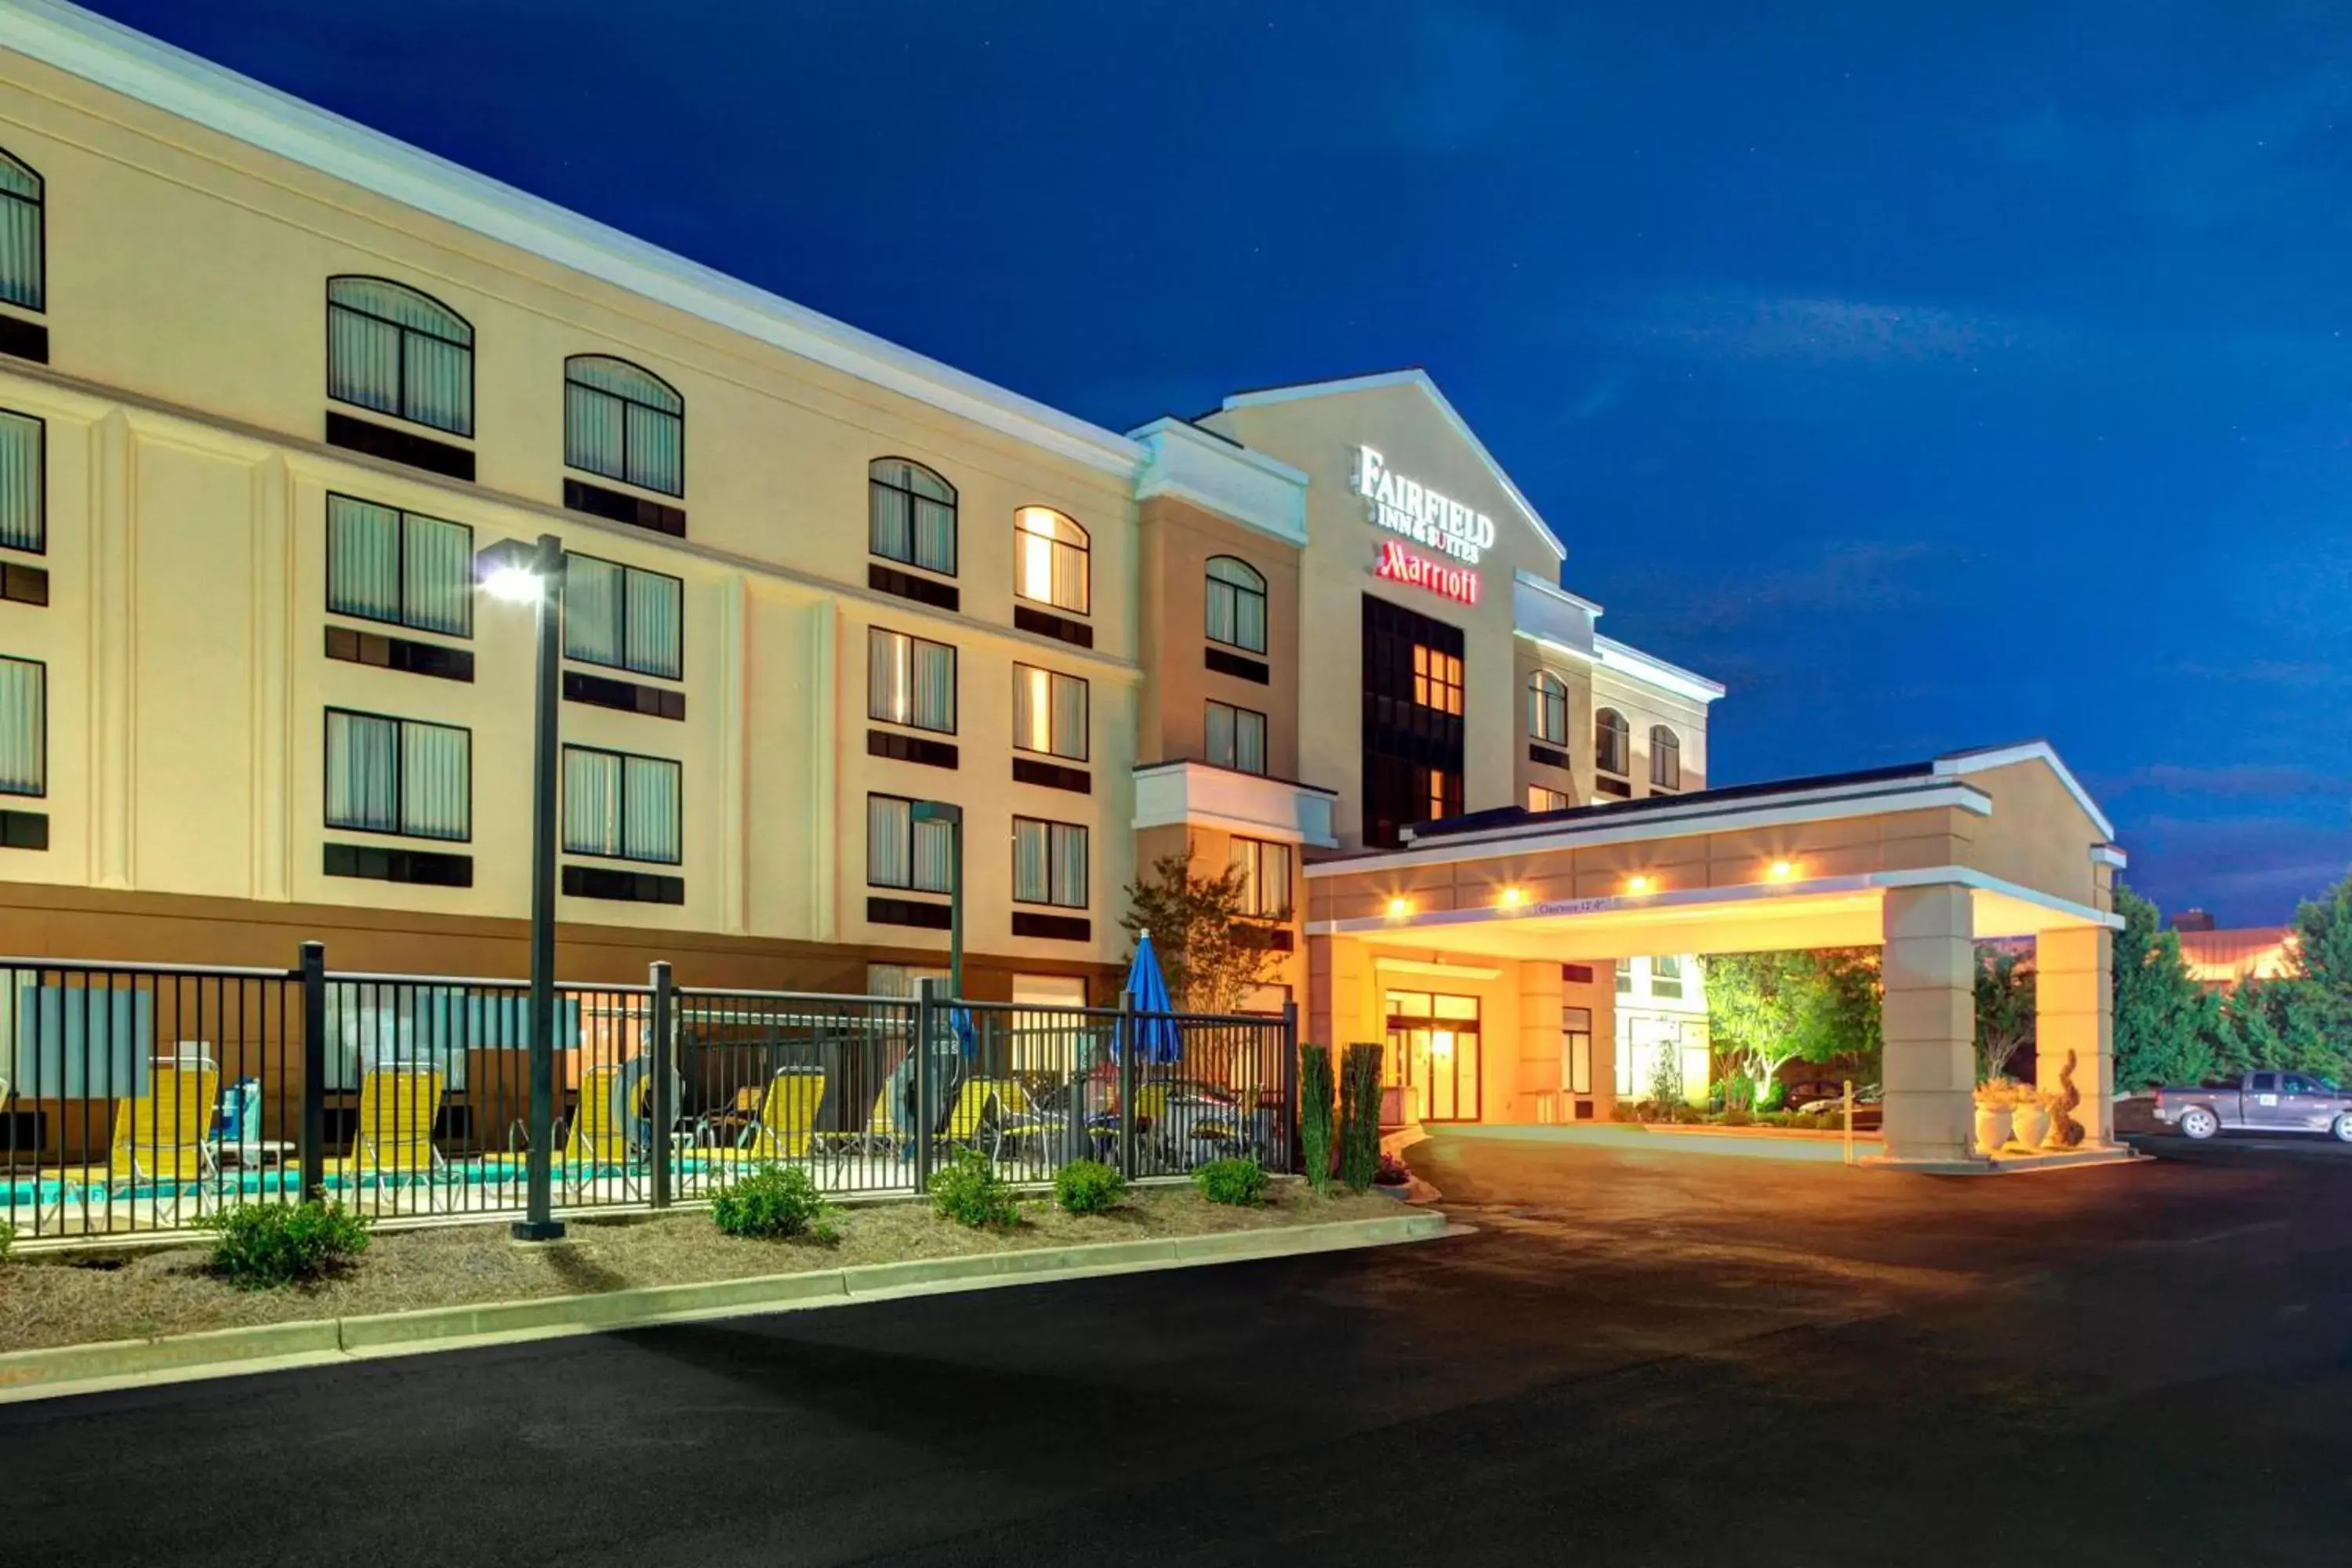 Property Building in Fairfield Inn & Suites by Marriott Anniston Oxford